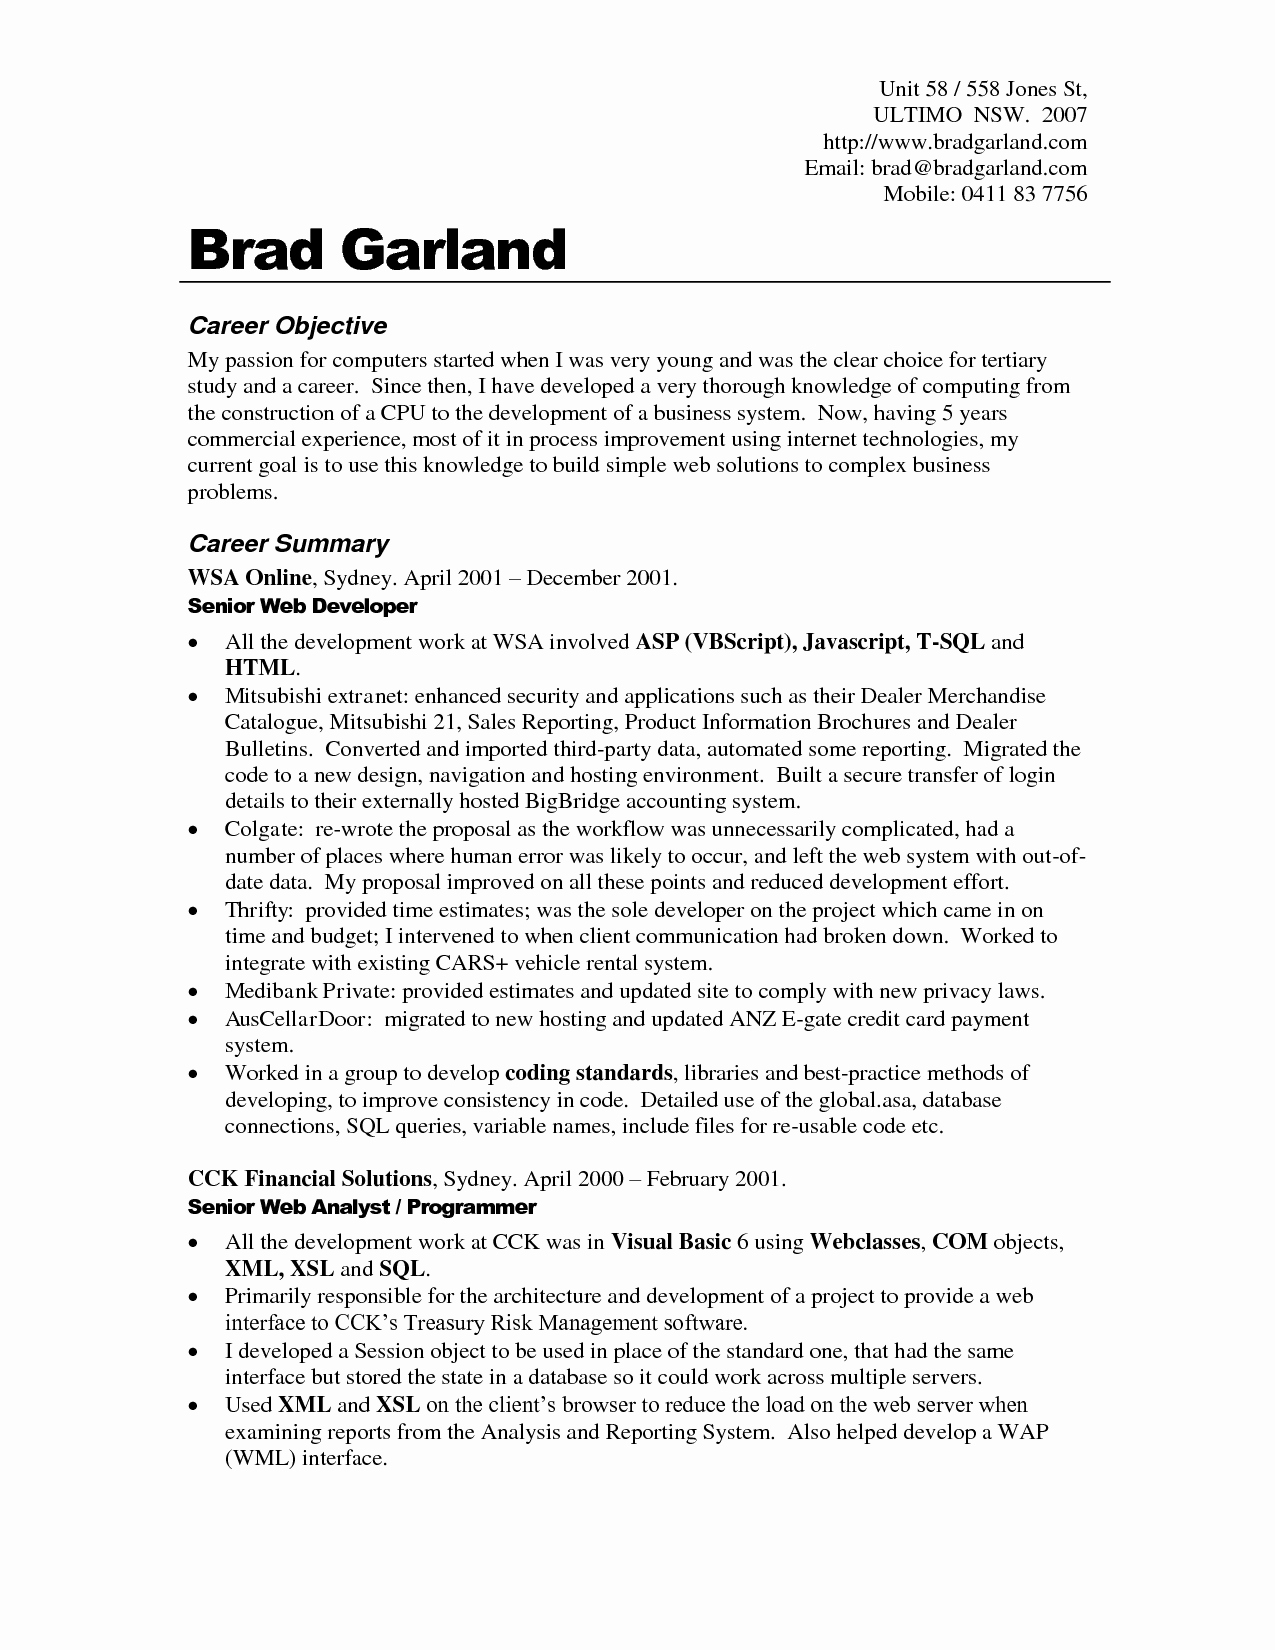 Resume Action Words  Guide To Traditional Examples Of Resume Action Words Buzzwords Non